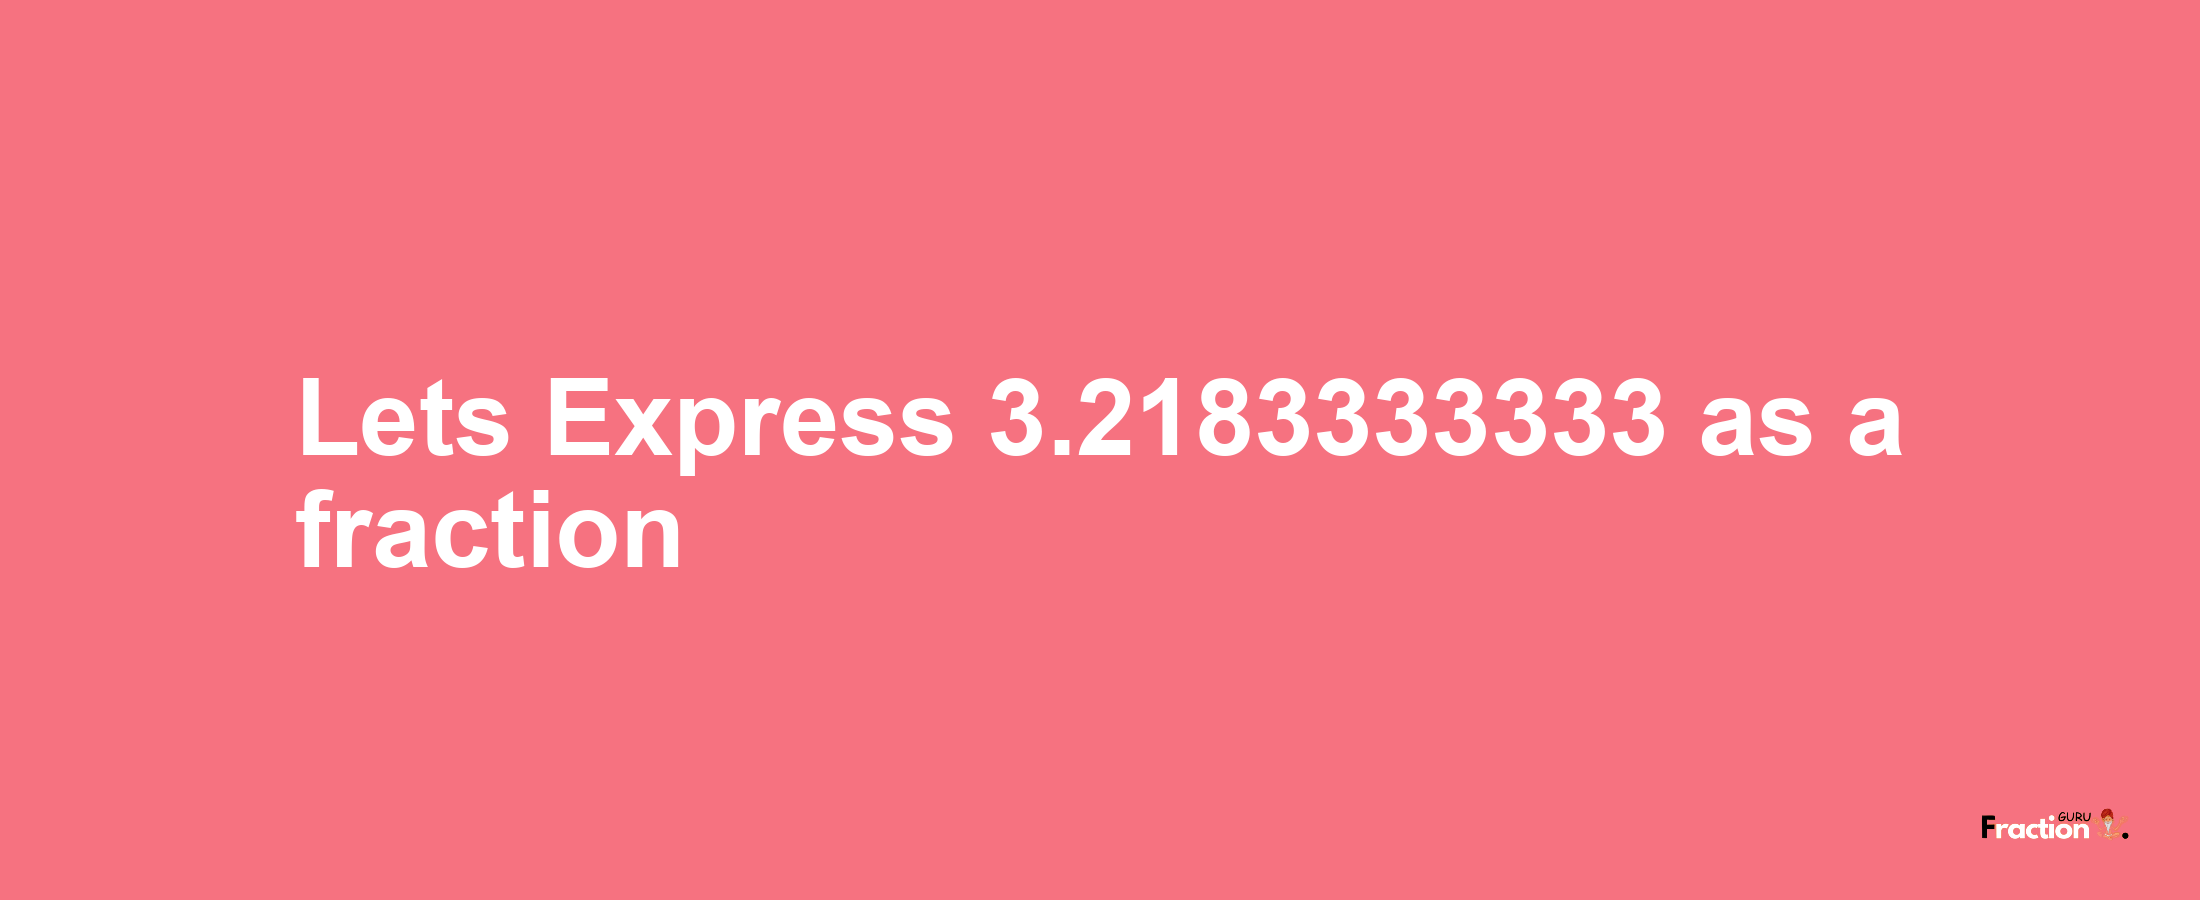 Lets Express 3.2183333333 as afraction